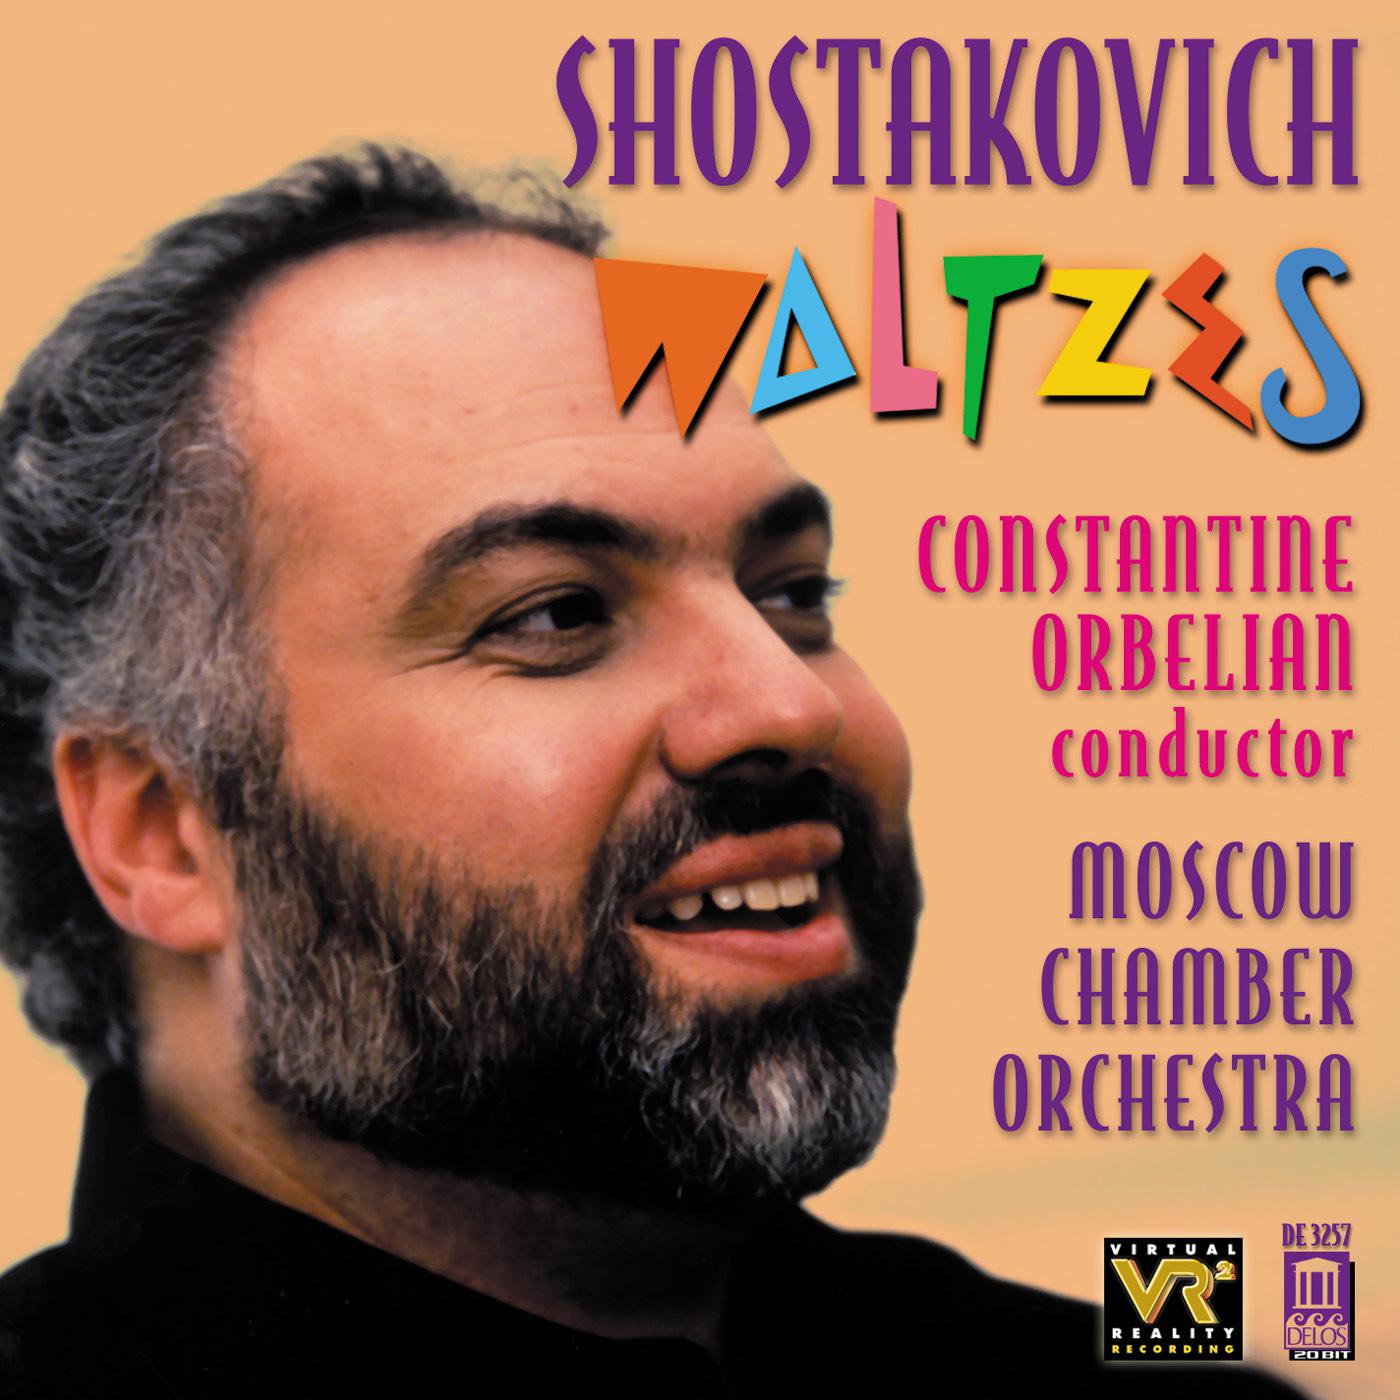 SHOSTAKOVICH, D.: Orchestral Music (Waltzes) (Moscow Chamber Orchestra, Orbelian)